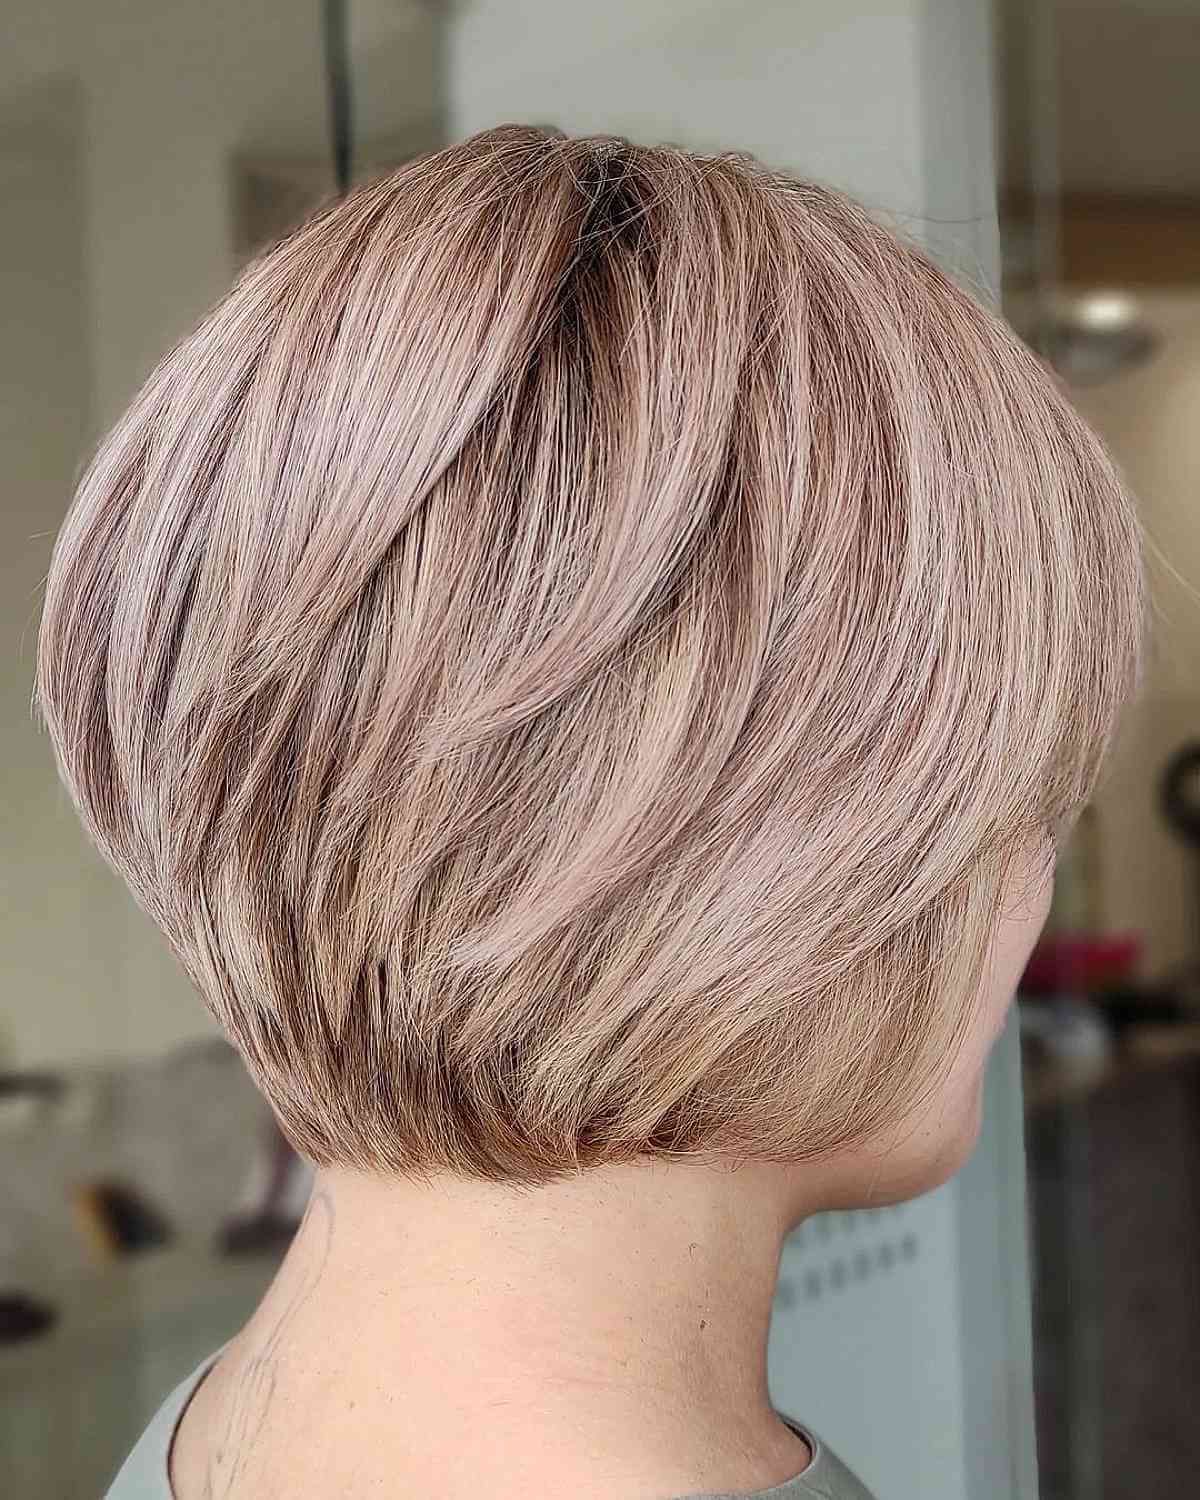 The 34 Cutest Pixie Bob Haircut Ideas Ever For Layered Messy Pixie Bob Hairstyles (View 23 of 25)